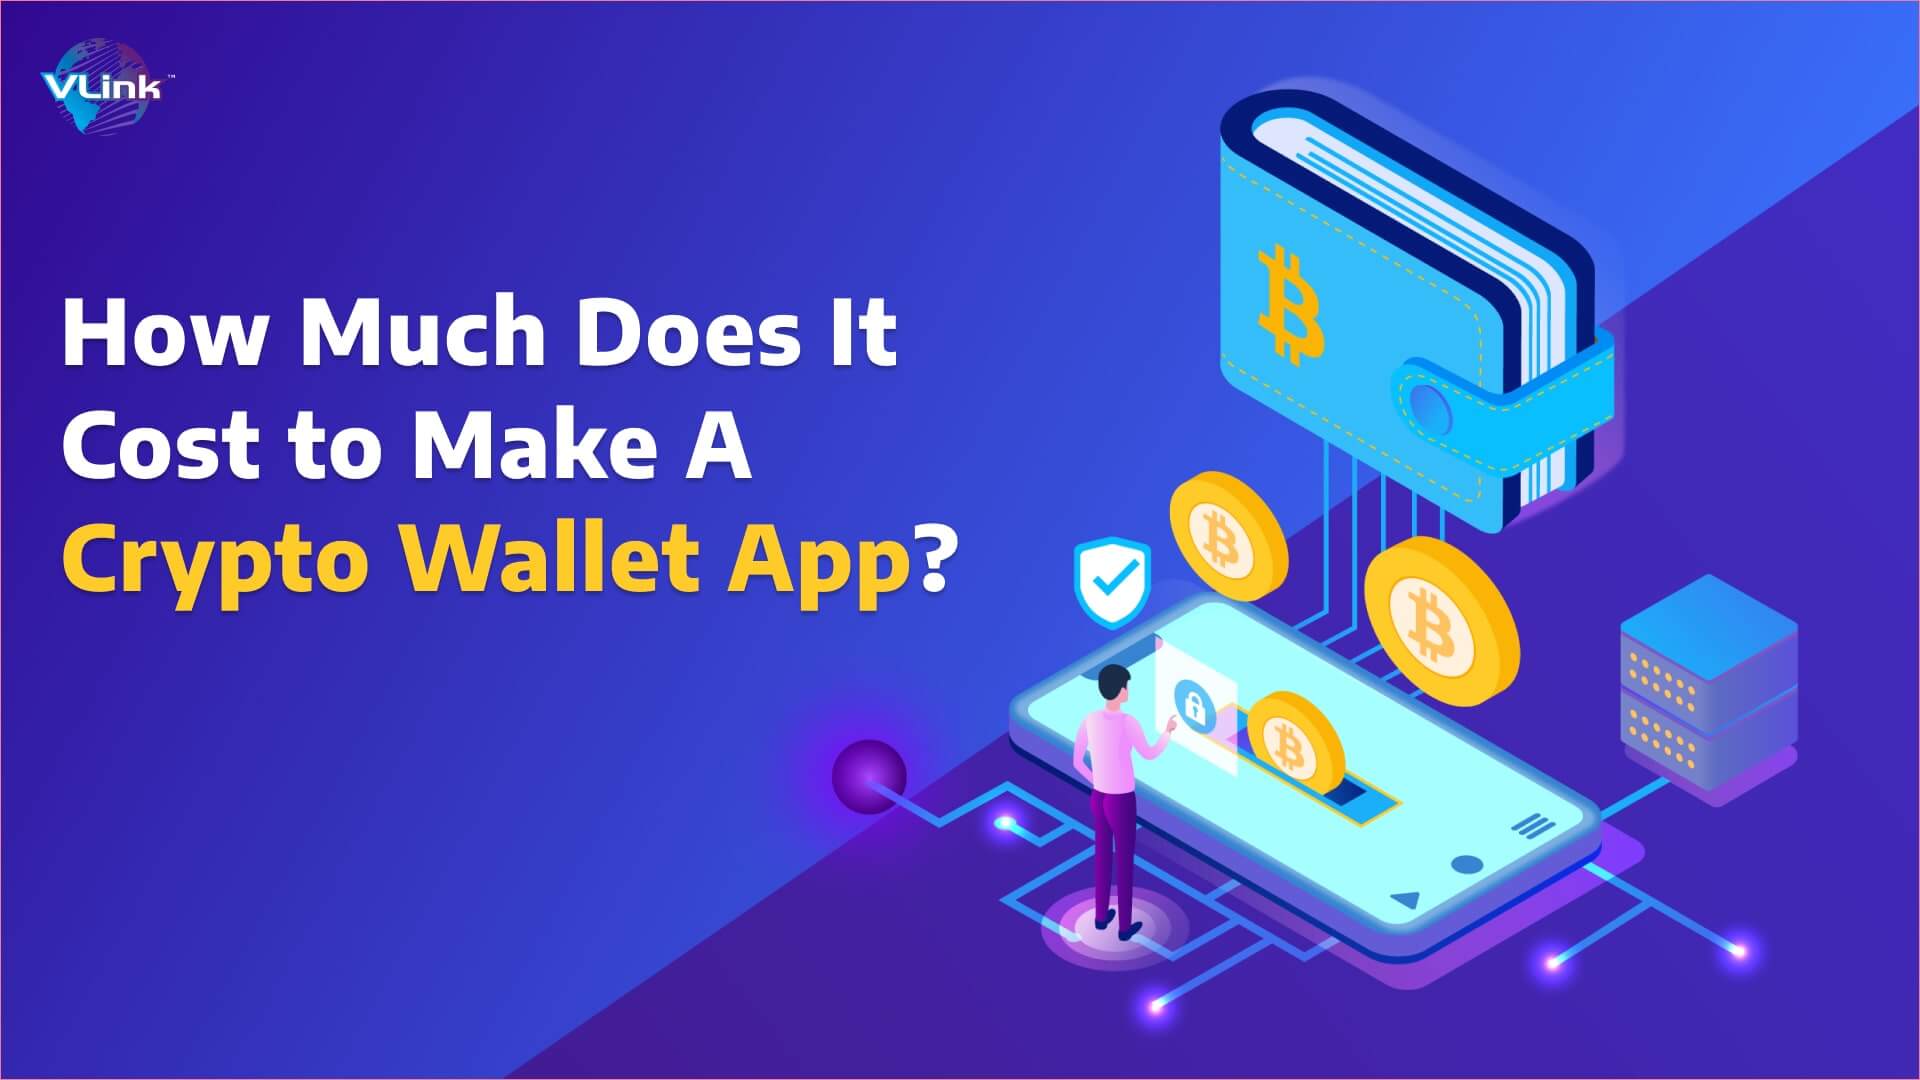 How Much Does It Cost to Build a Crypto Wallet App?